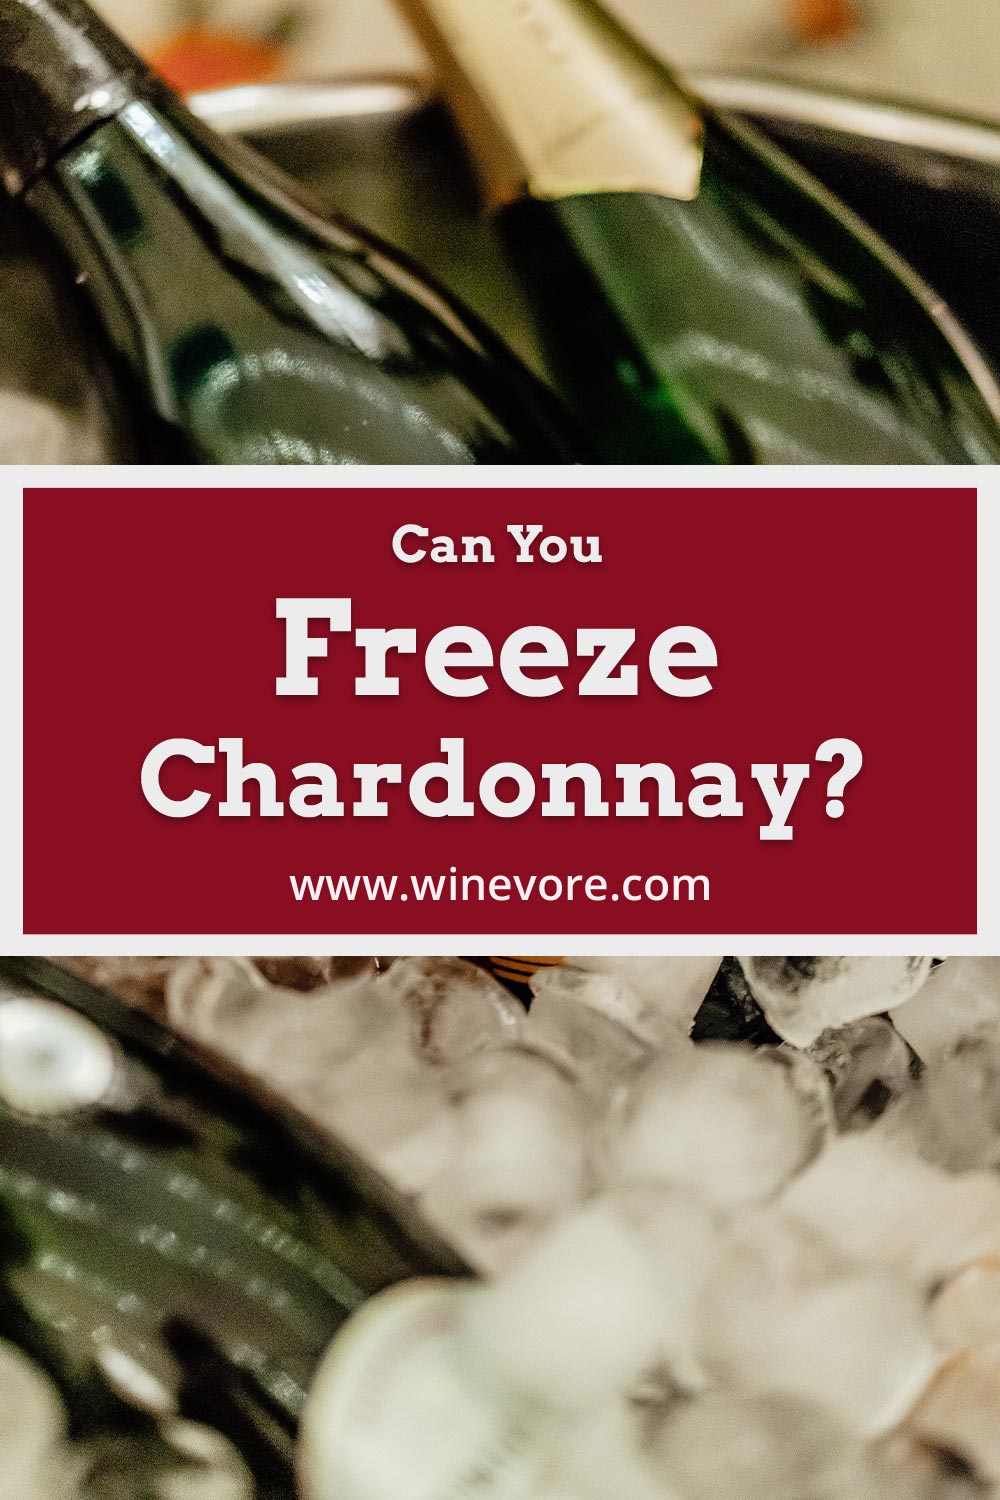 Bottles of chardonnay in a bucket full of ice - Can You Freeze them?